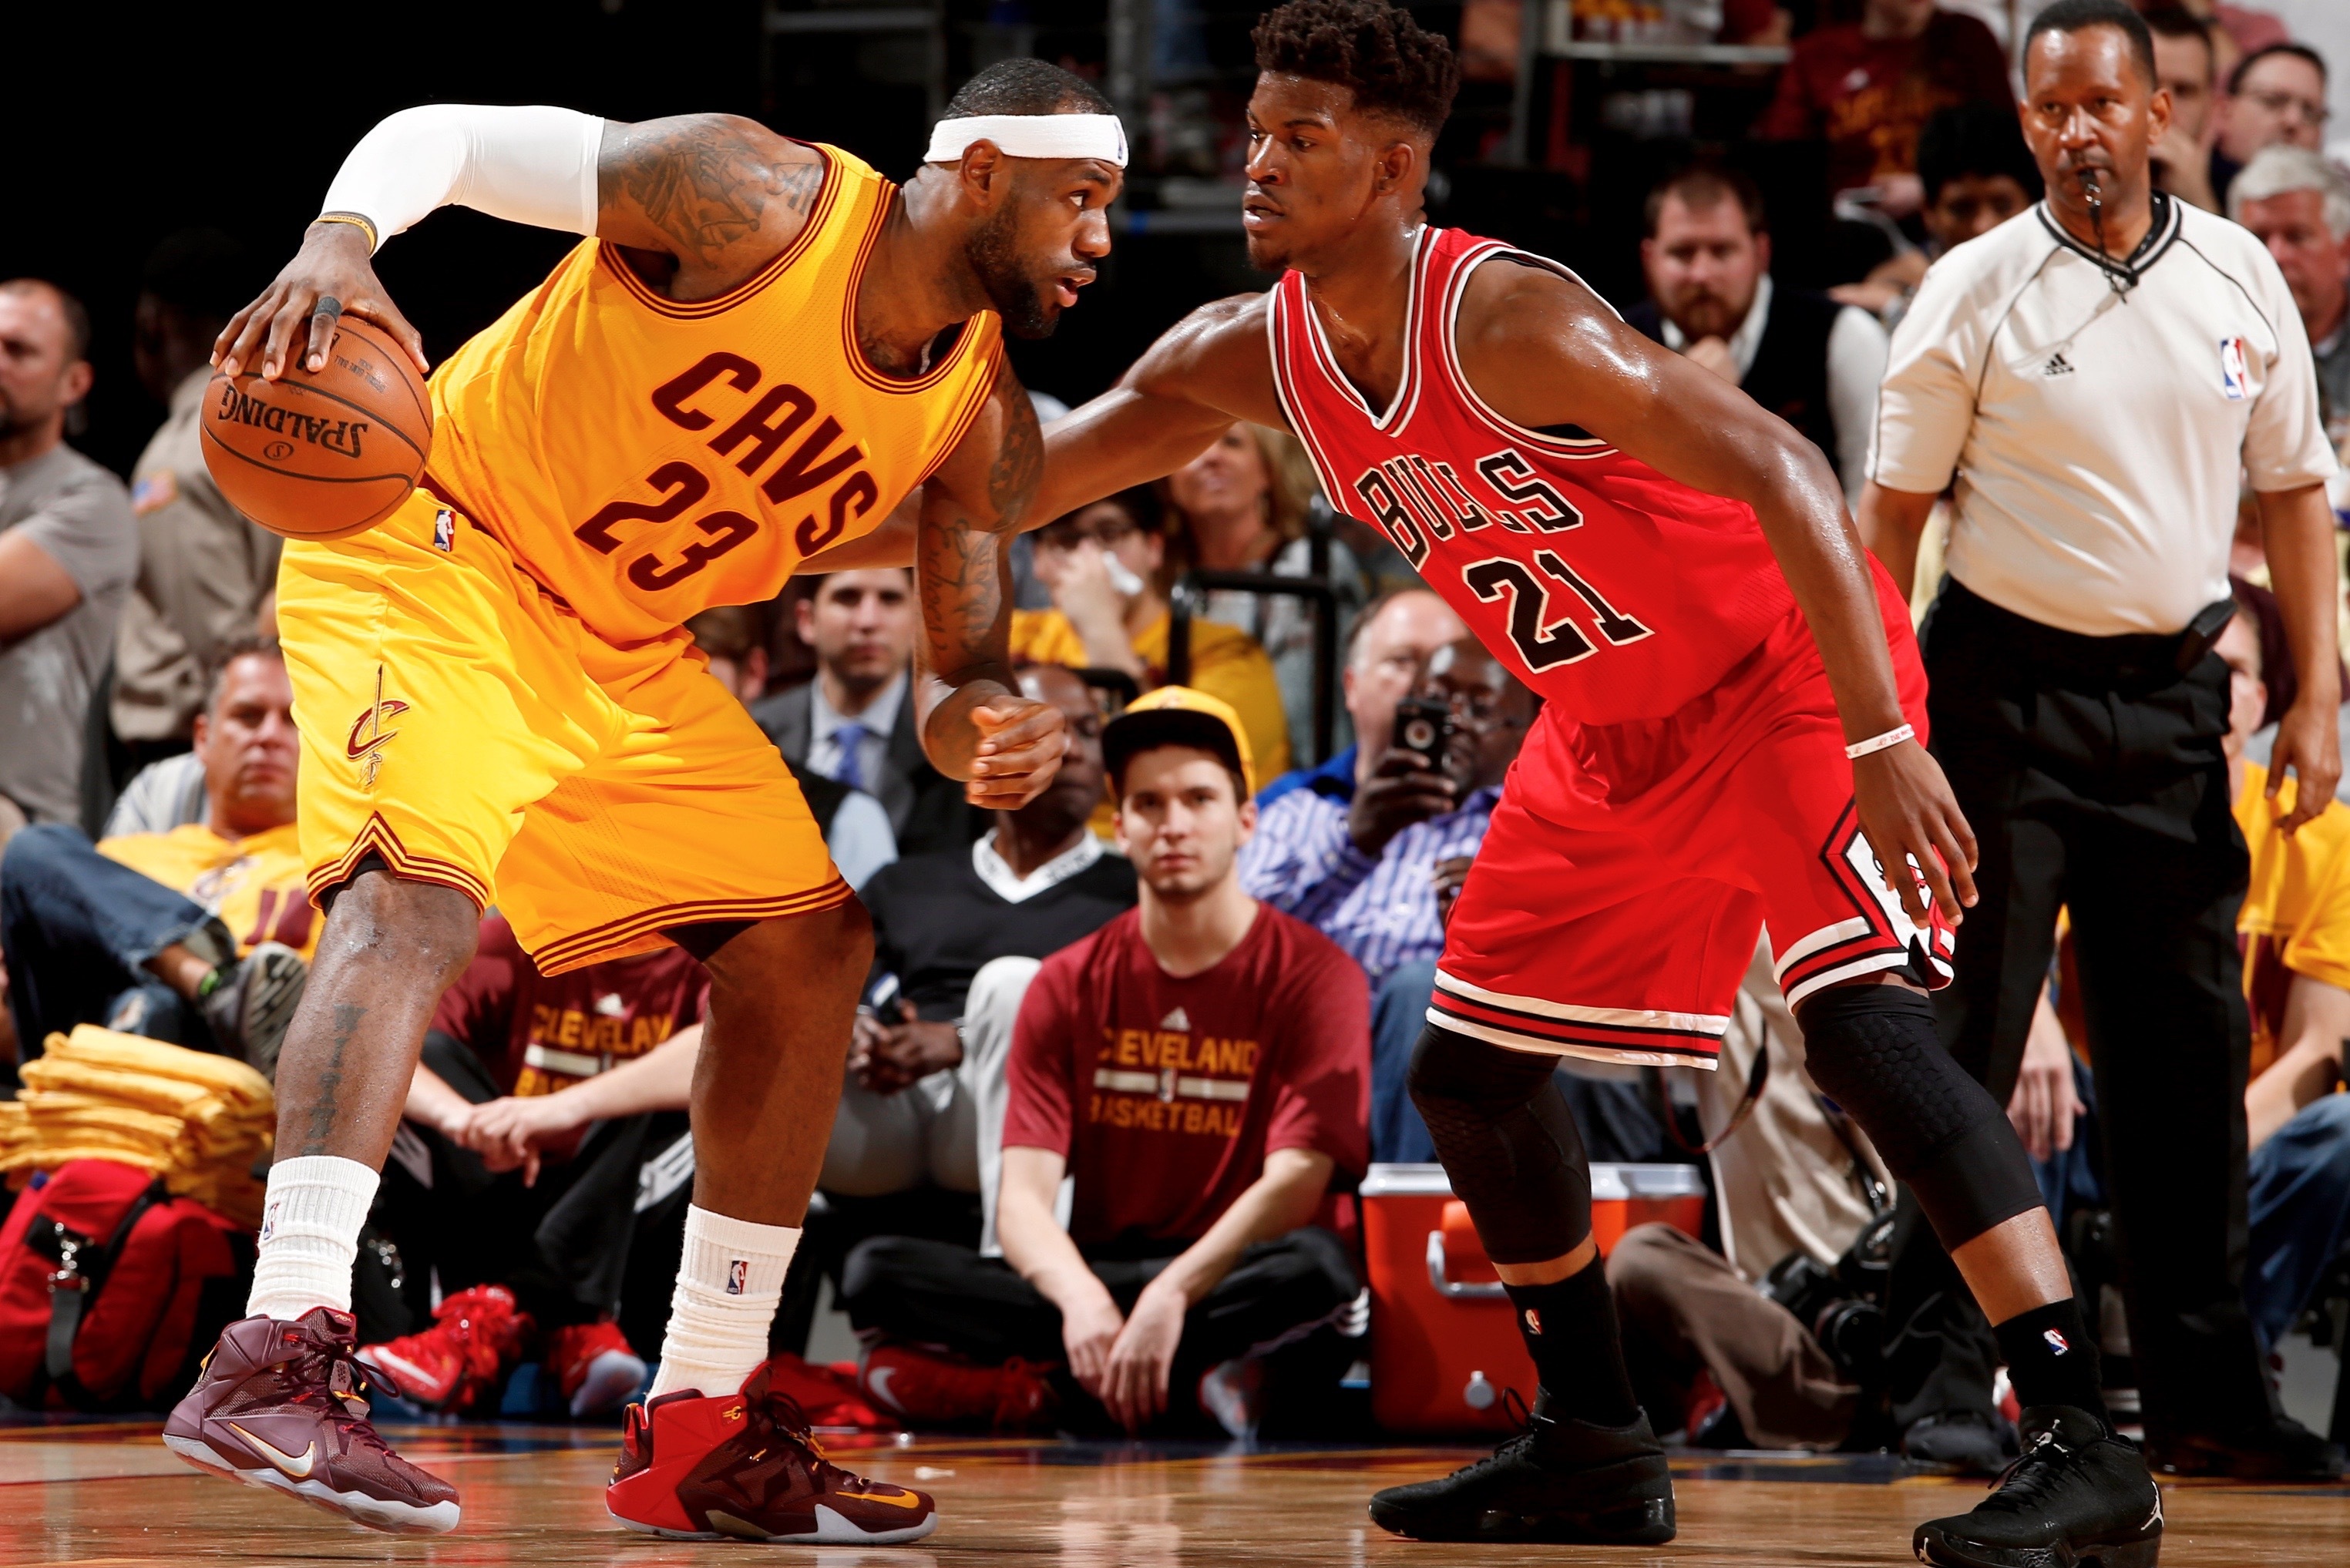 Chicago Bulls vs. Cleveland Cavaliers Live Score, Analysis for Game 2